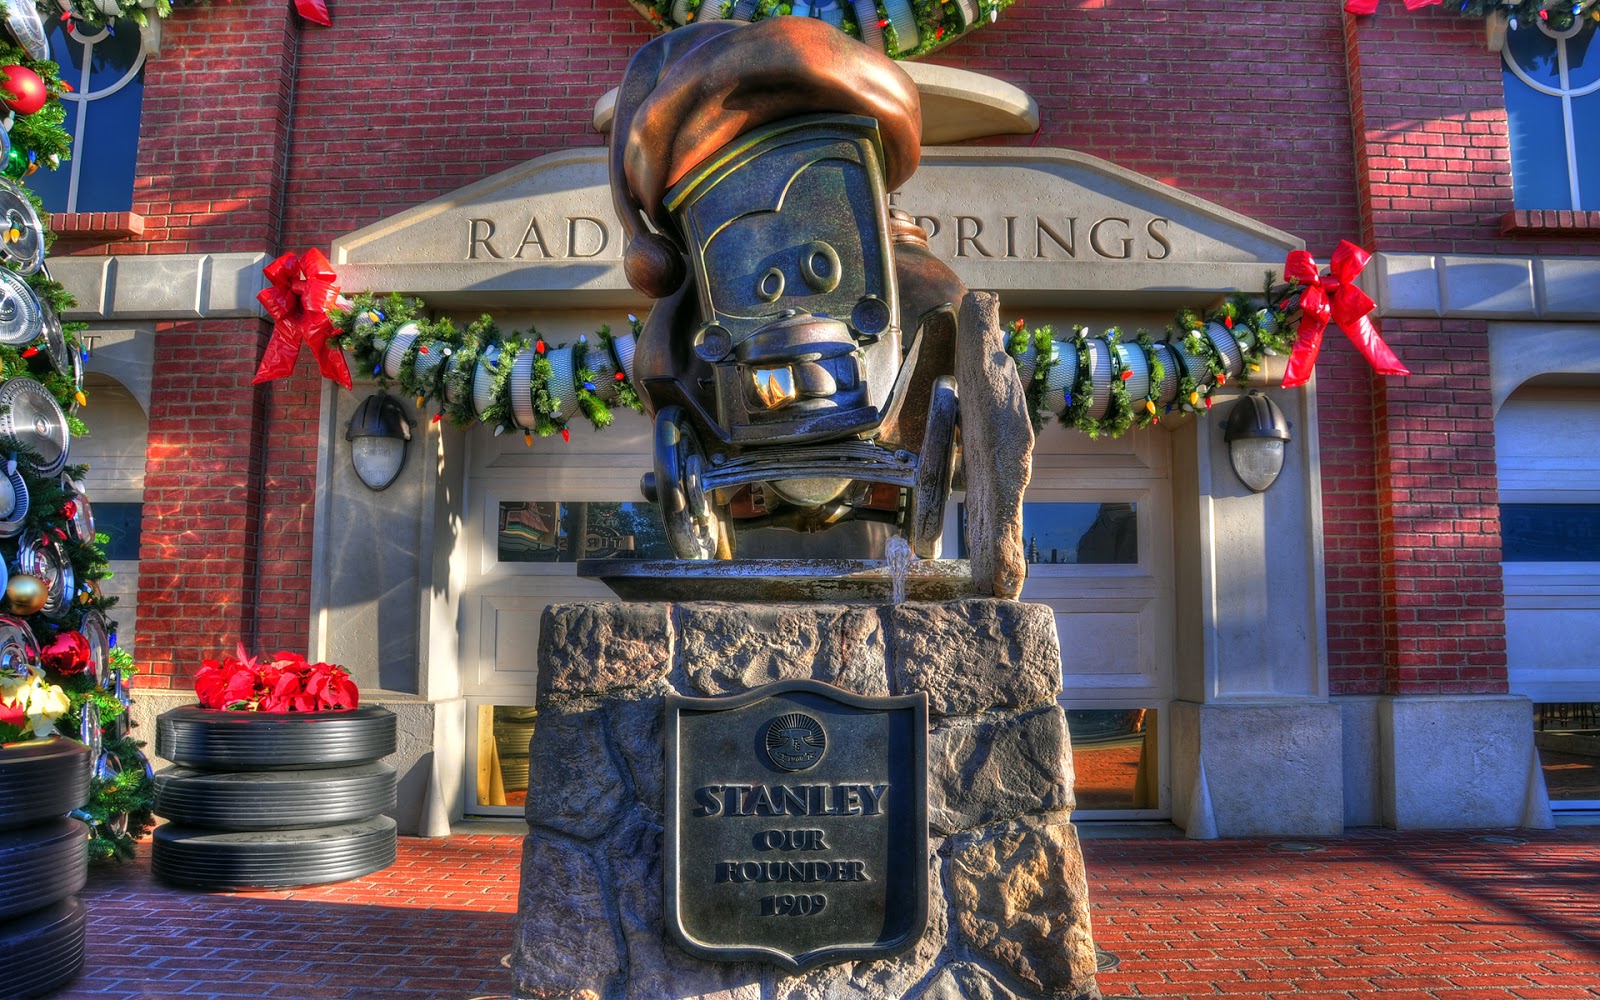 Jingle Mouse Character Band for Stanley Adventure Cup